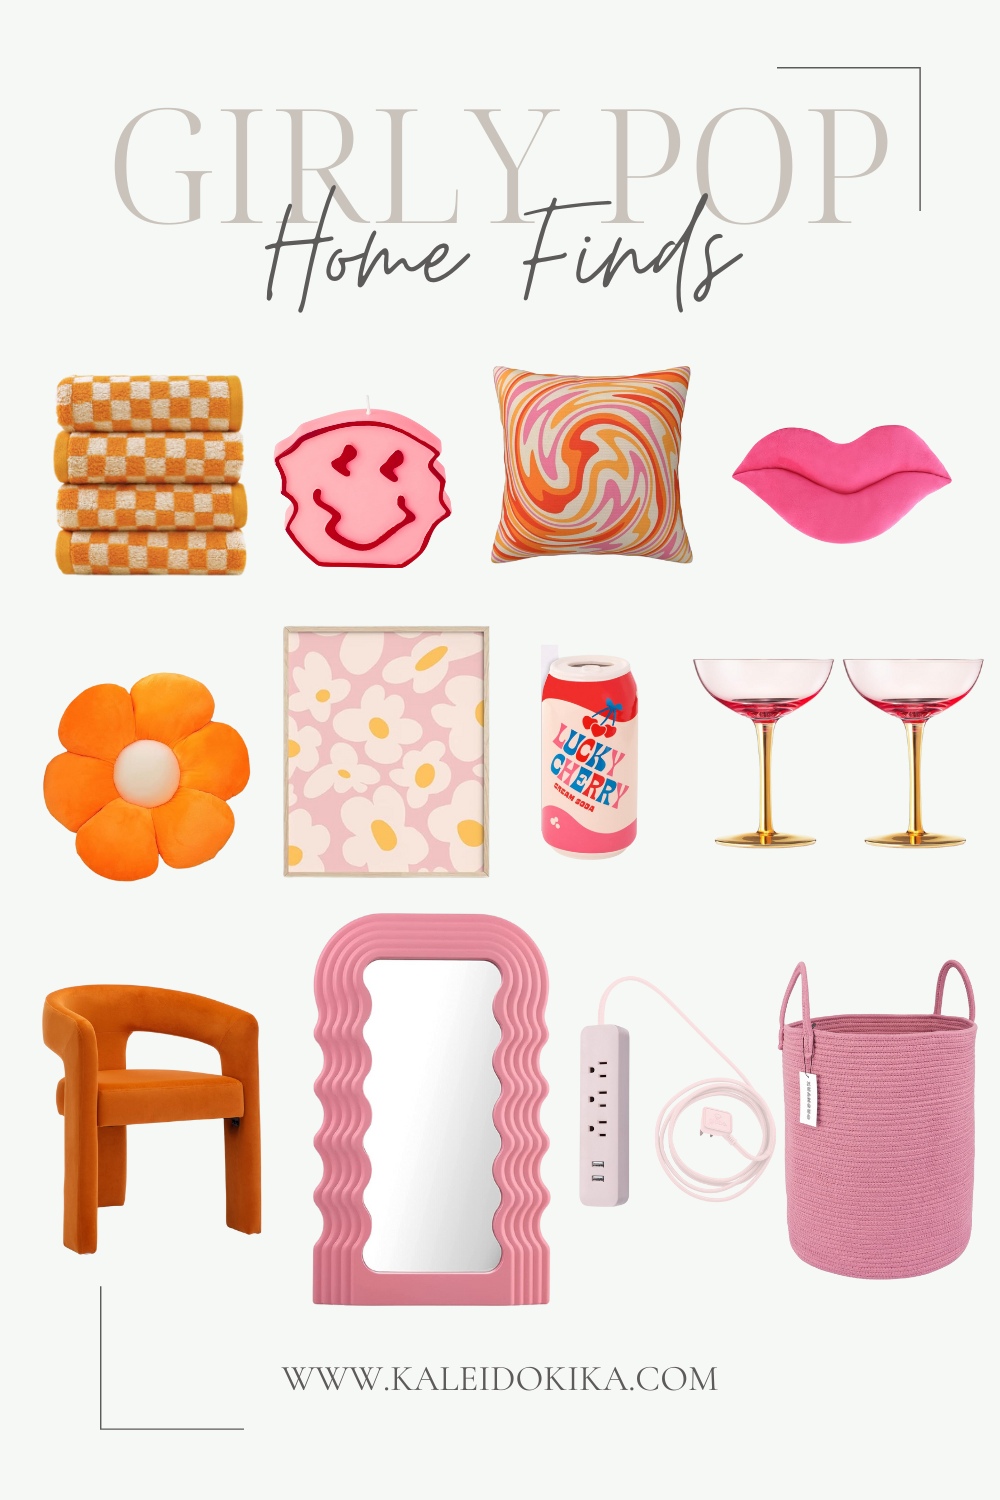 Image showing a bunch of girly pop themed home finds from Amazon